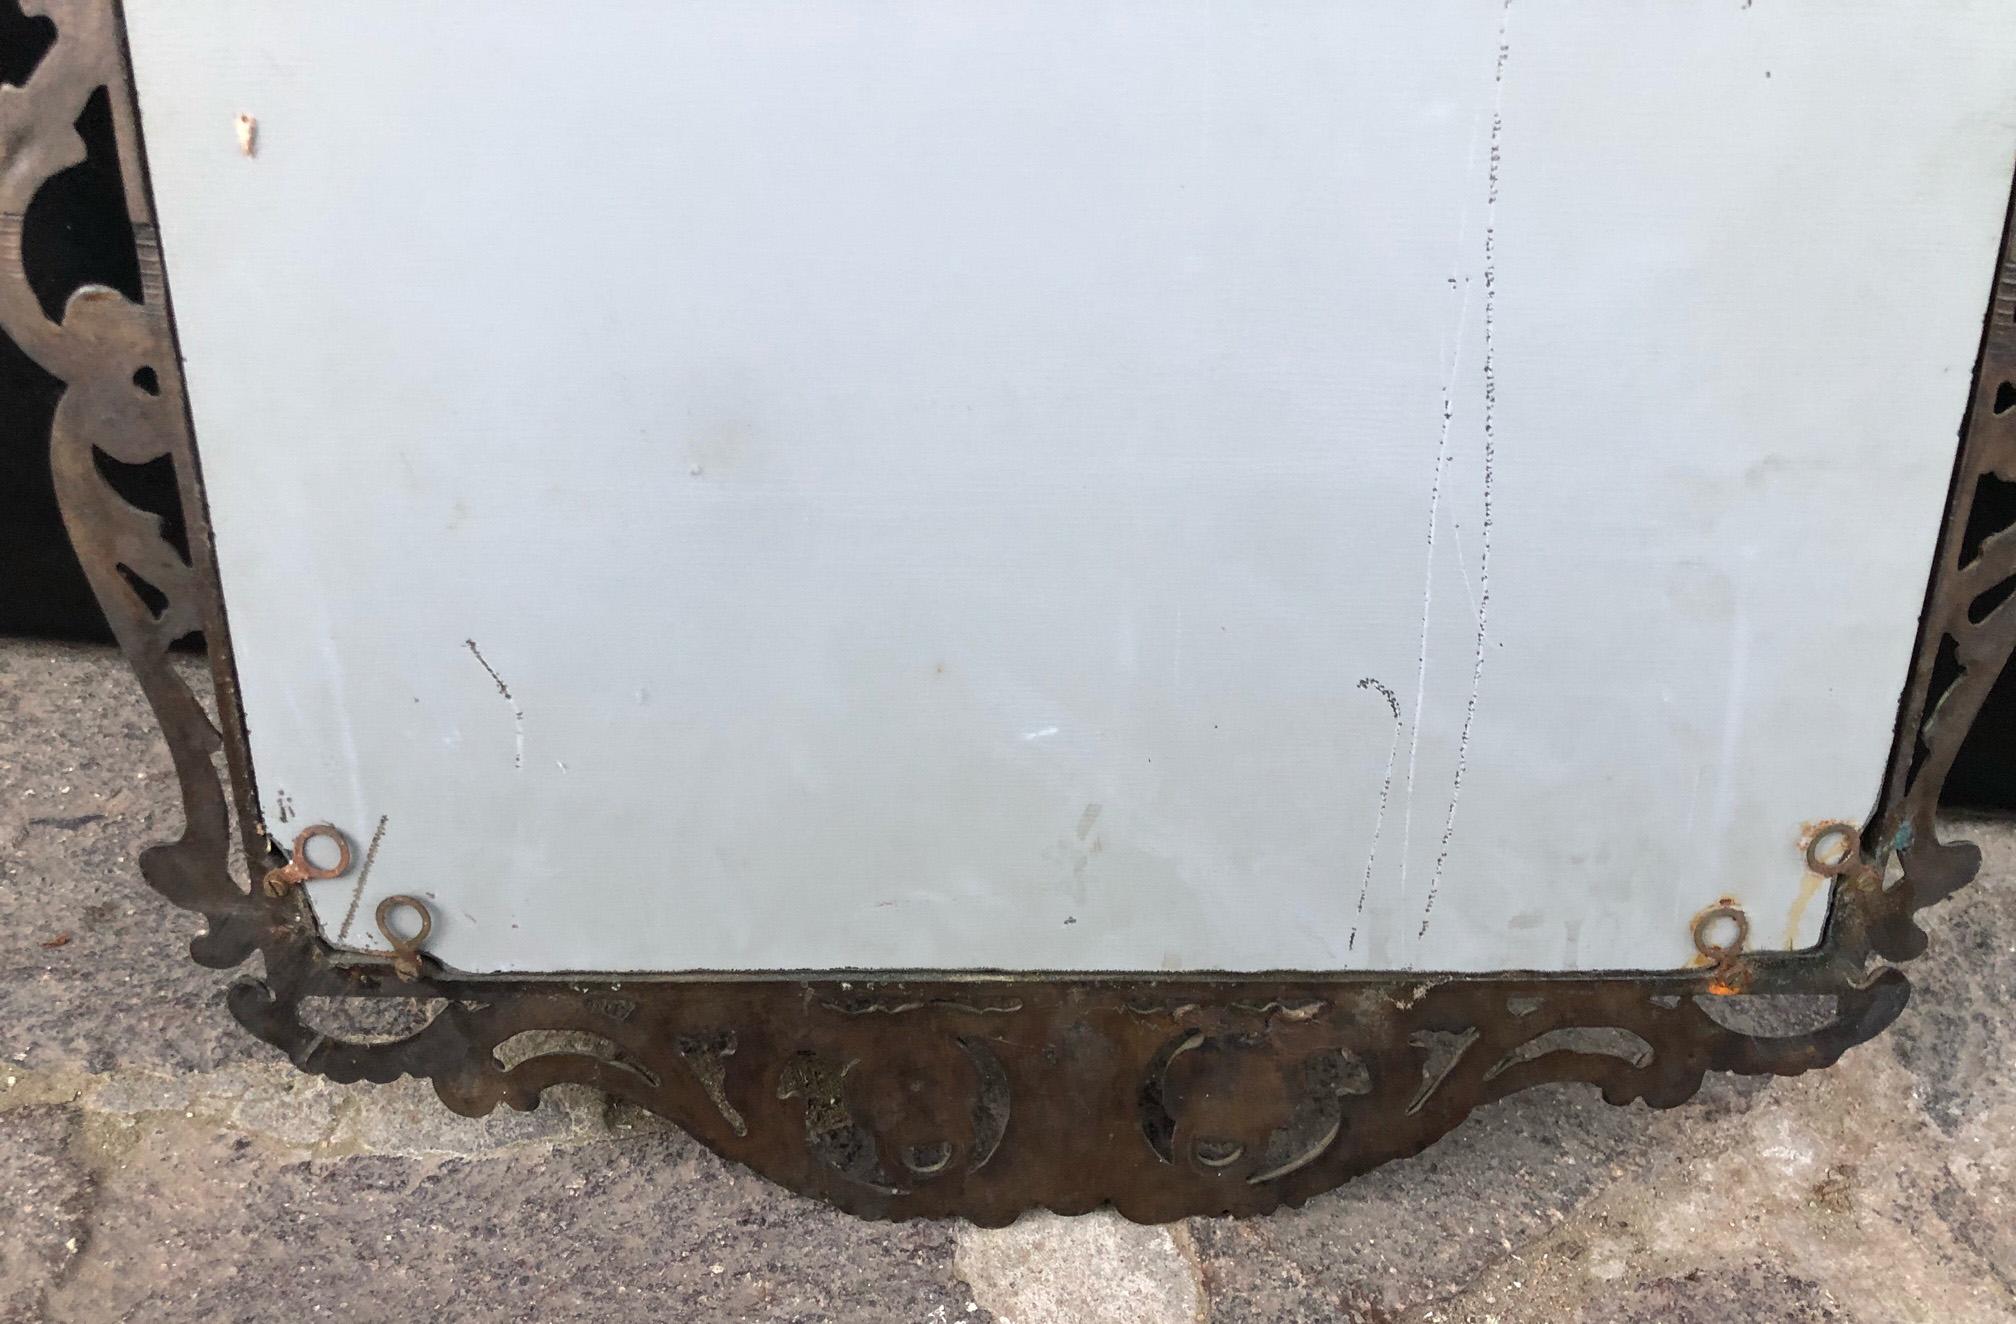 Italian 1940 brass mirror with original glass.
Given the weight and size, it will be delivered in a specific wooden case for export, packed in bubble wrap.
It comes from an old country house in the Chianti area of Tuscany.
The brass is original